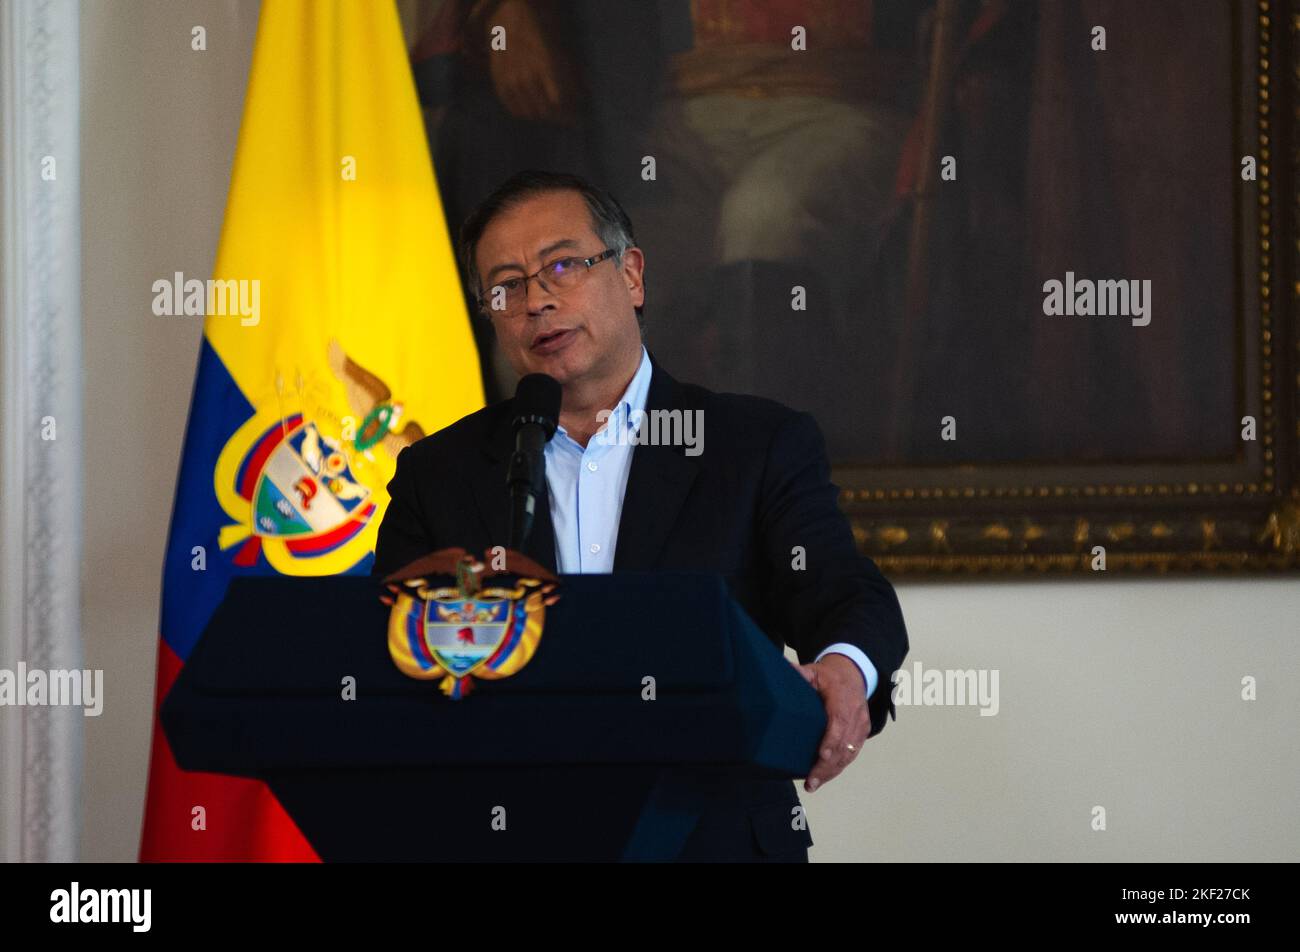 Bogota, Colombia. 15th Nov, 2022. Colombian president Gustavo Petro speaks during a press conference about the first 100 days of his government in office, in Bogota, Colombia on November 15, 2022. Photo by: Chepa Beltran/Long Visual Press Credit: Long Visual Press/Alamy Live News Stock Photo